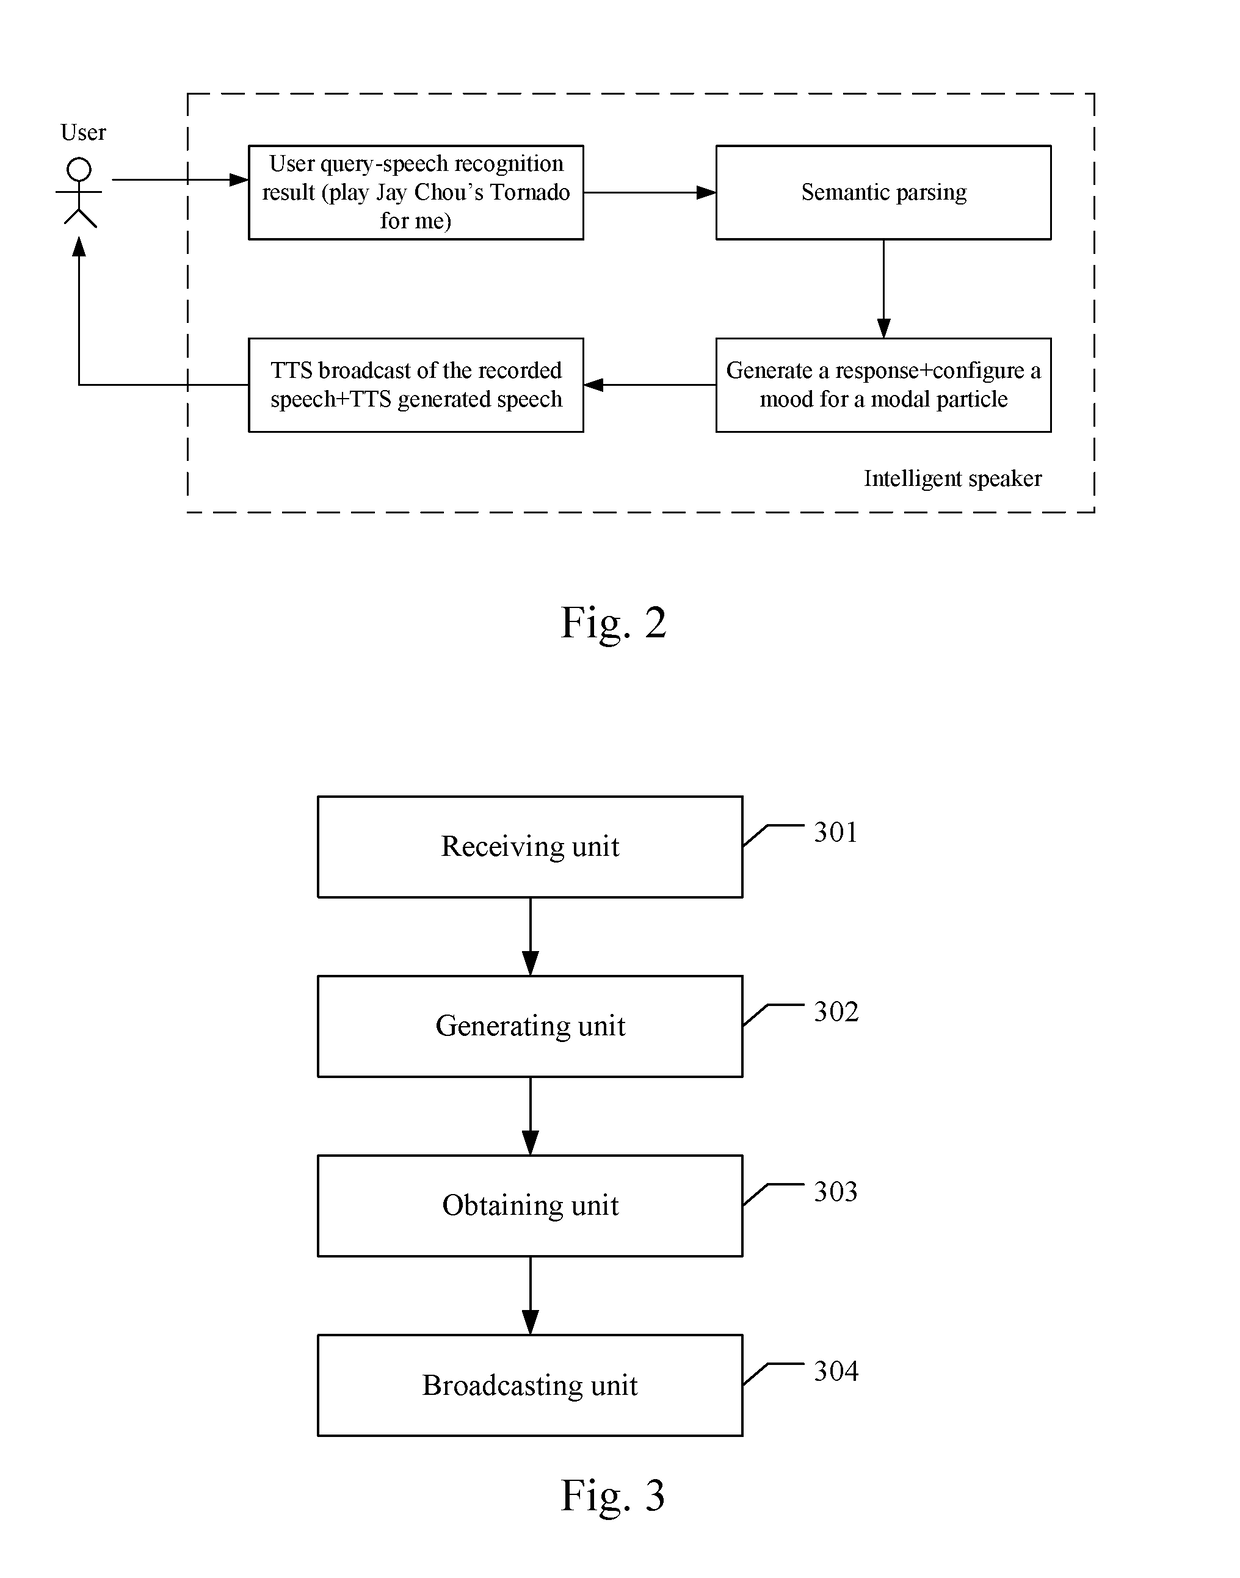 Method and Apparatus for Broadcasting a Response Based on Artificial Intelligence, and Storage Medium